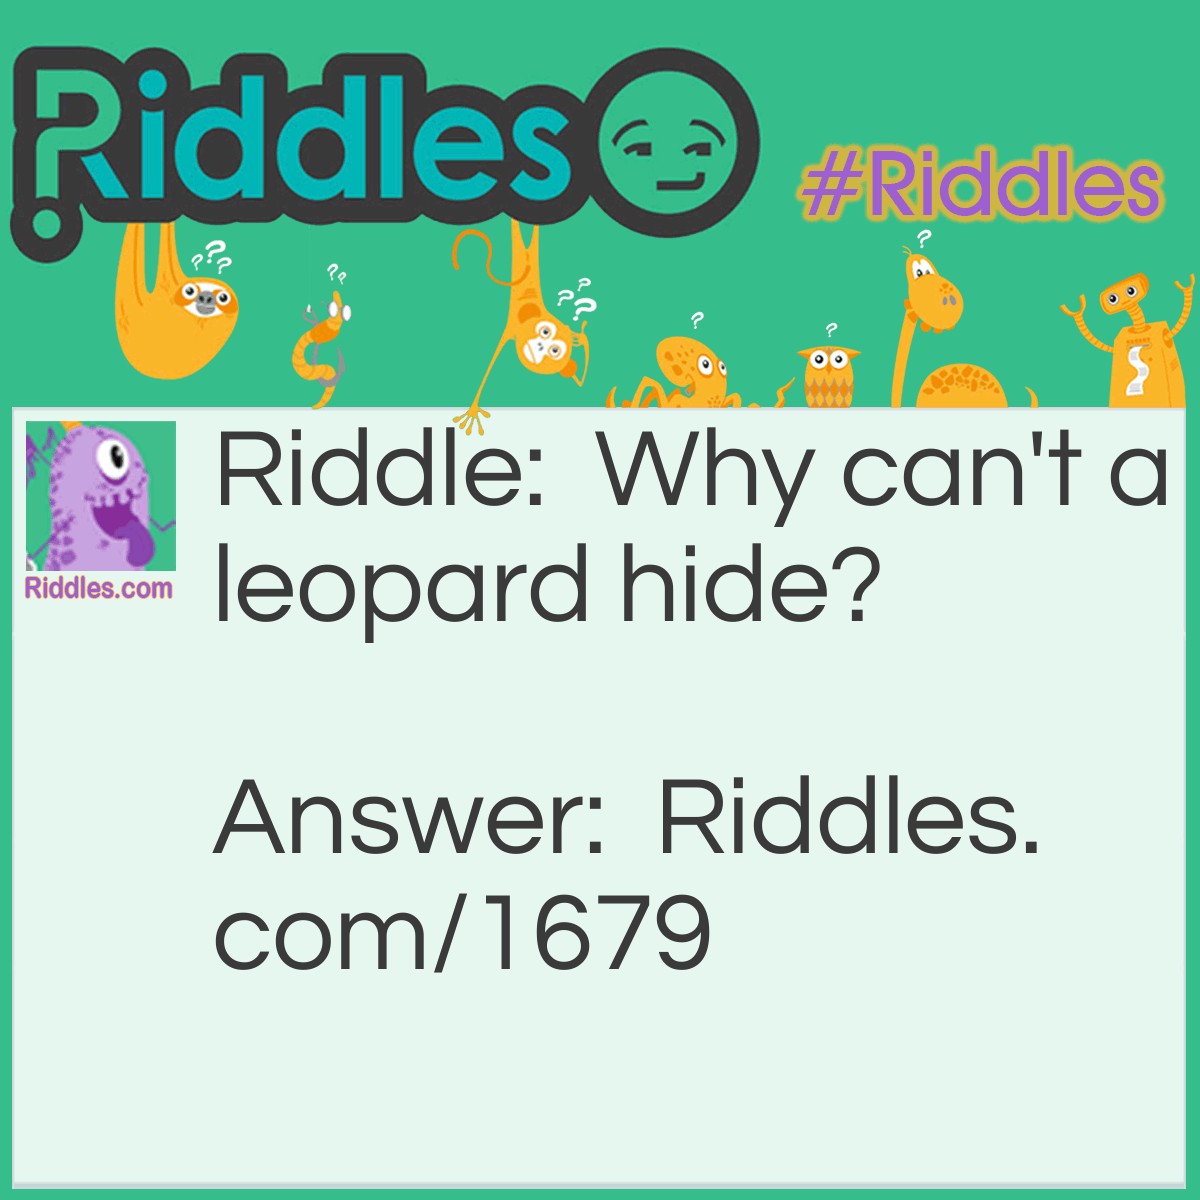 Riddle: Why can't a leopard hide? Answer: Because he's always spotted!